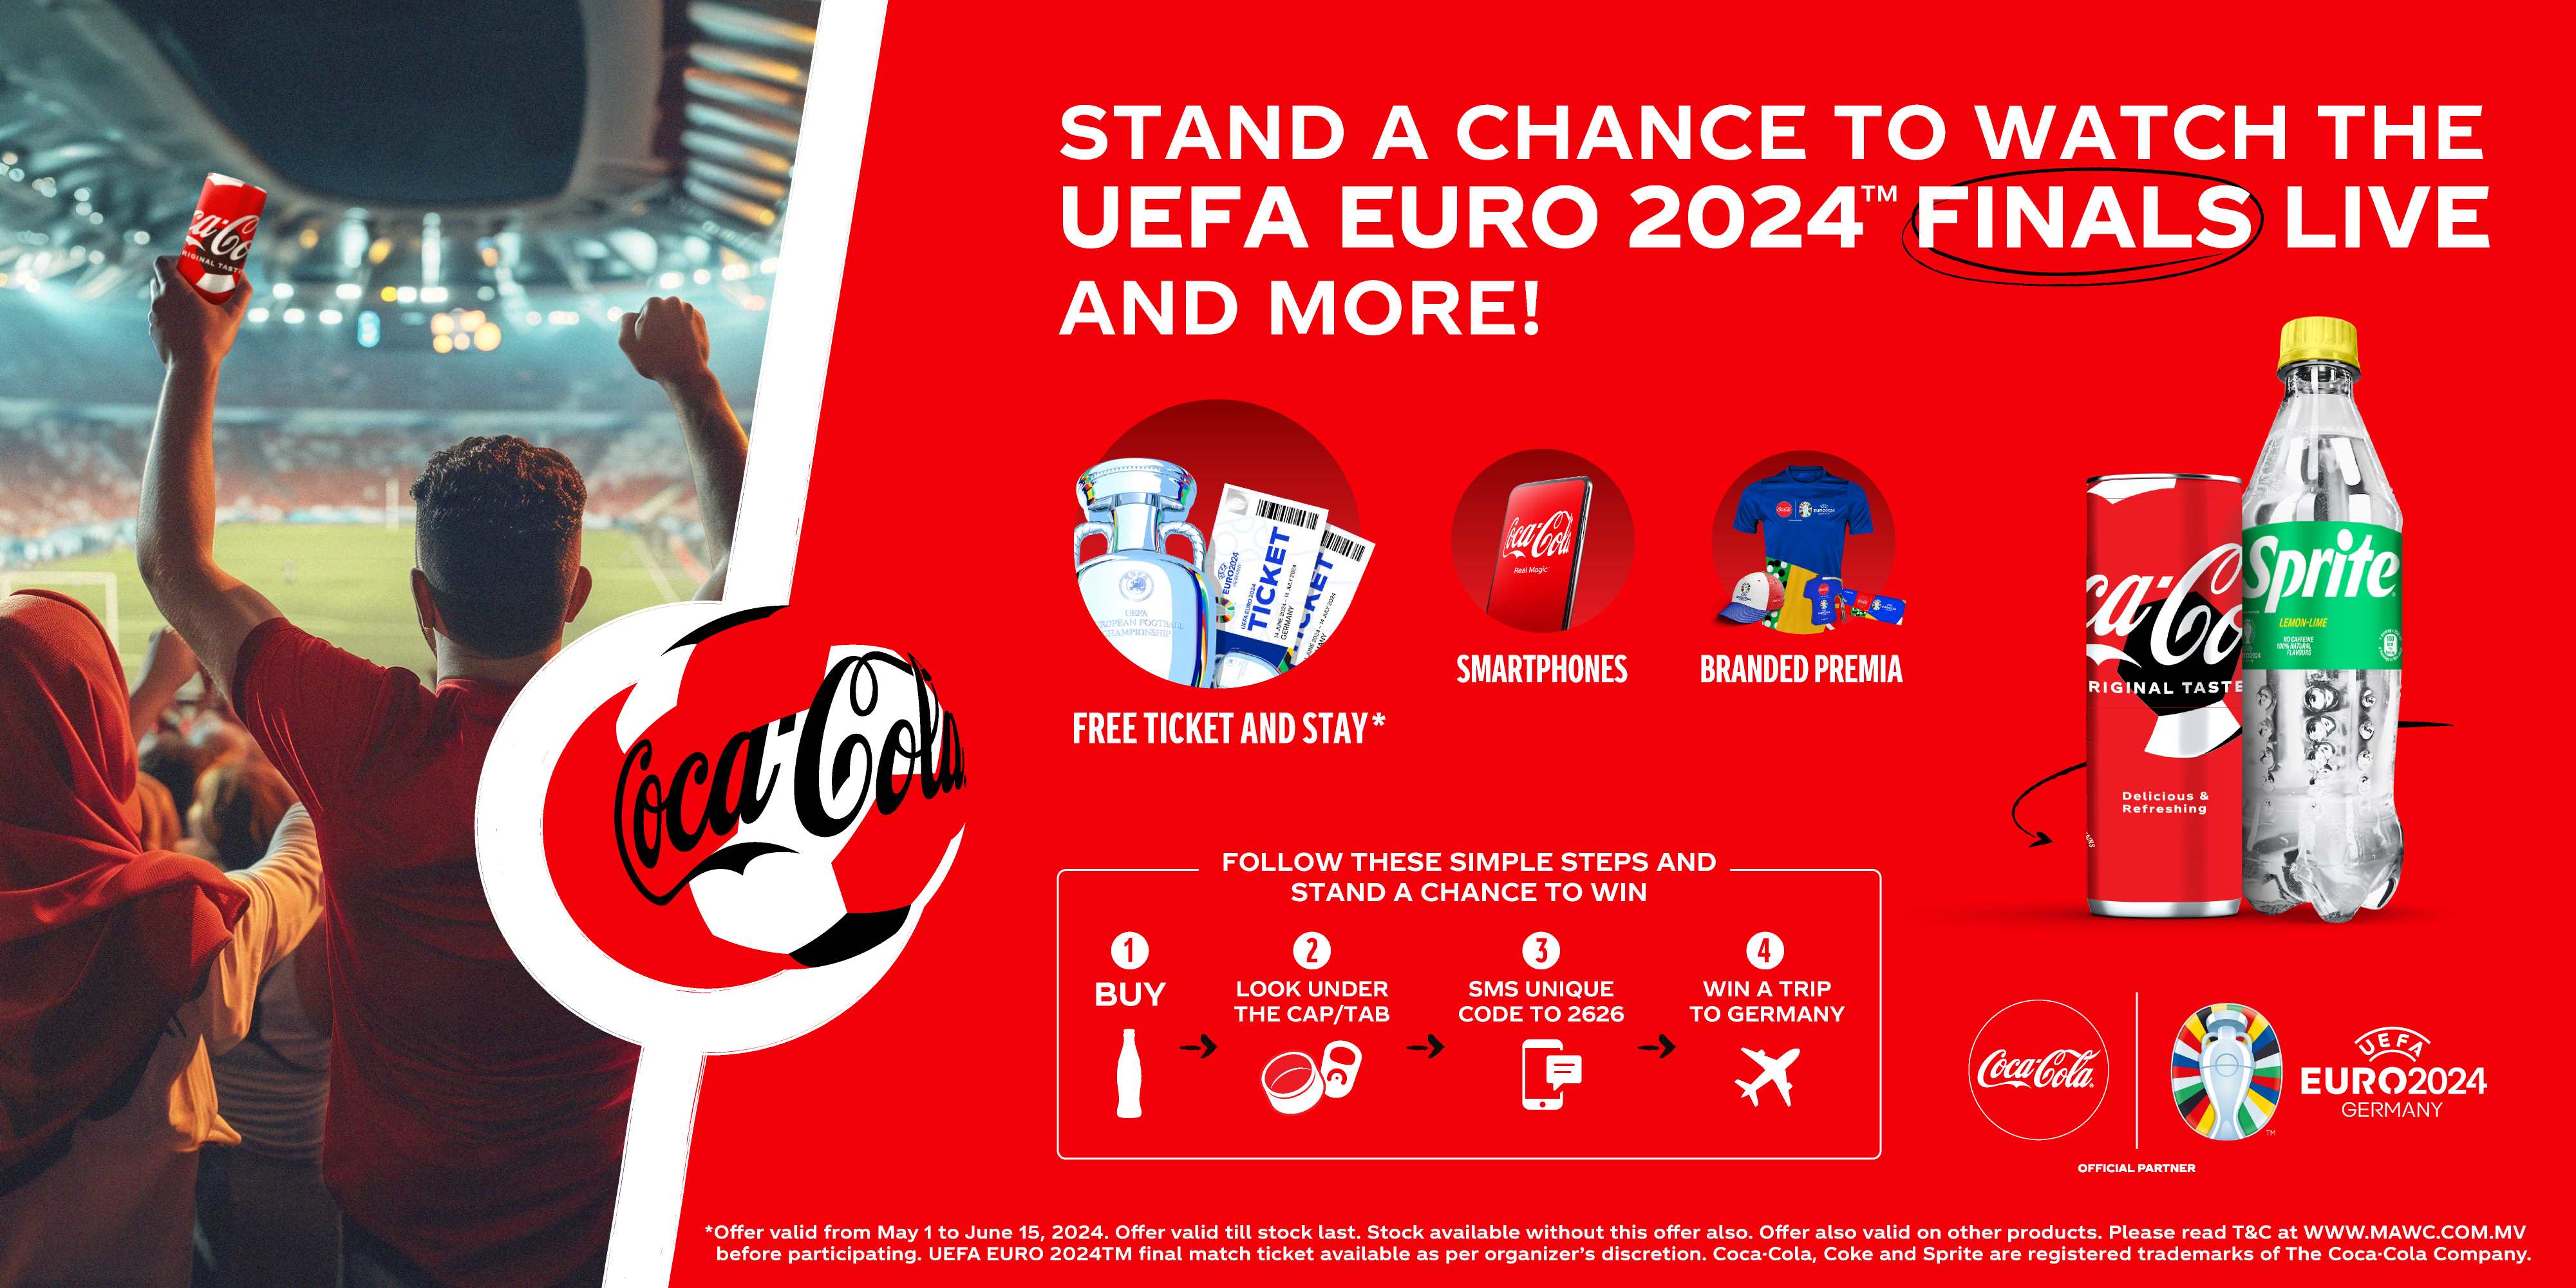 Coca-Cola partners with UEFA EURO 2024, offers fans chance to win trip to Berlin